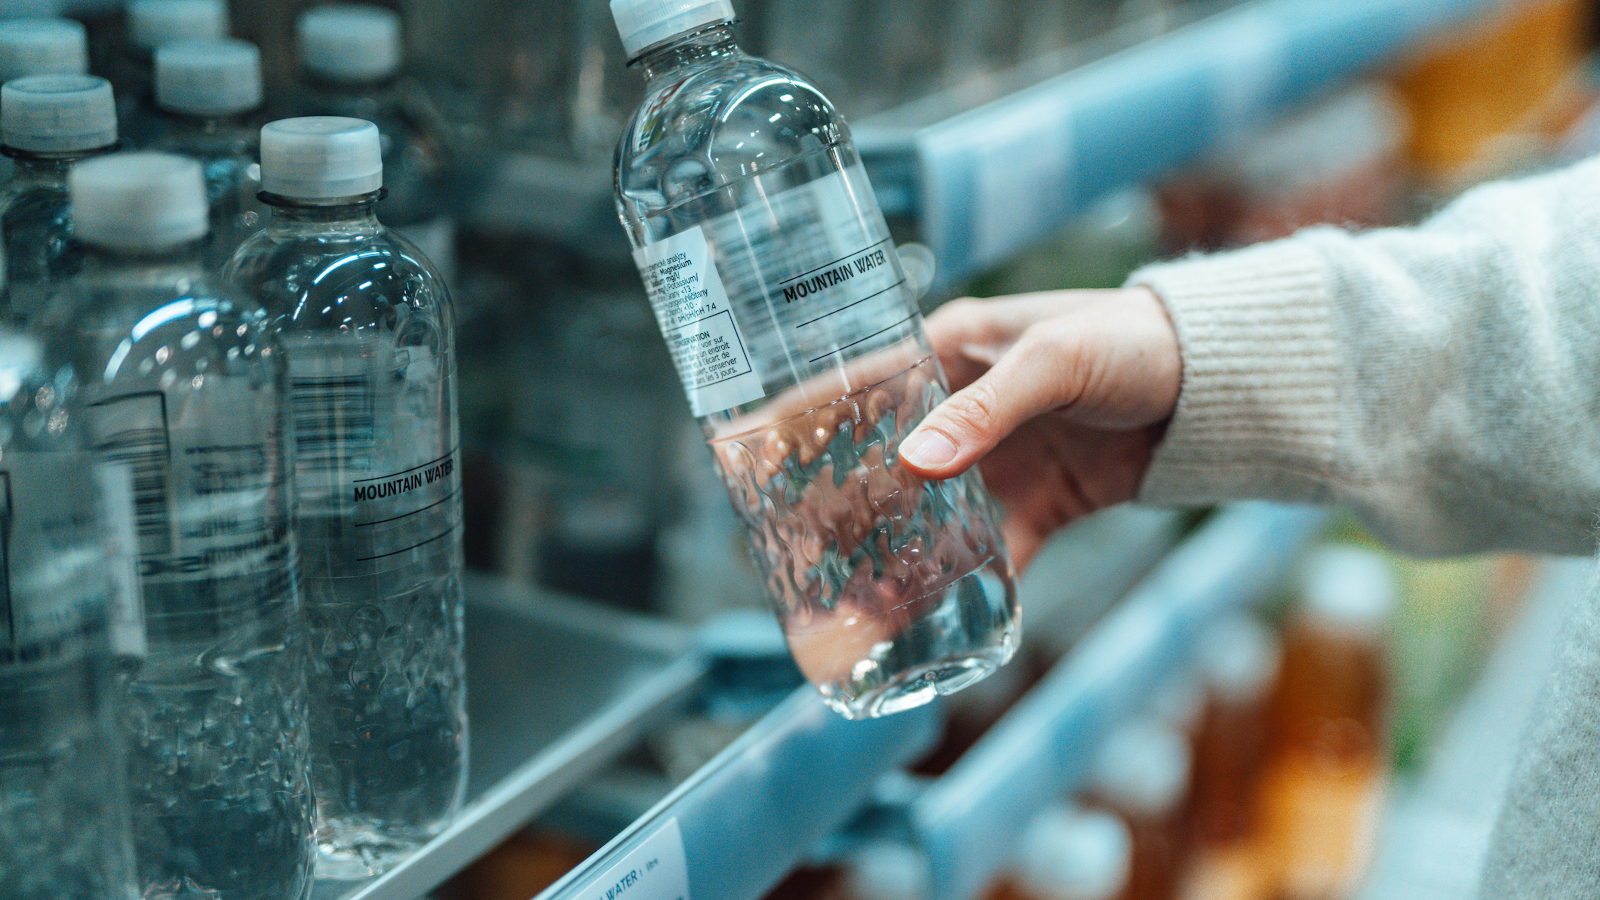 where does bottled water come from and is bottled water safe to drink